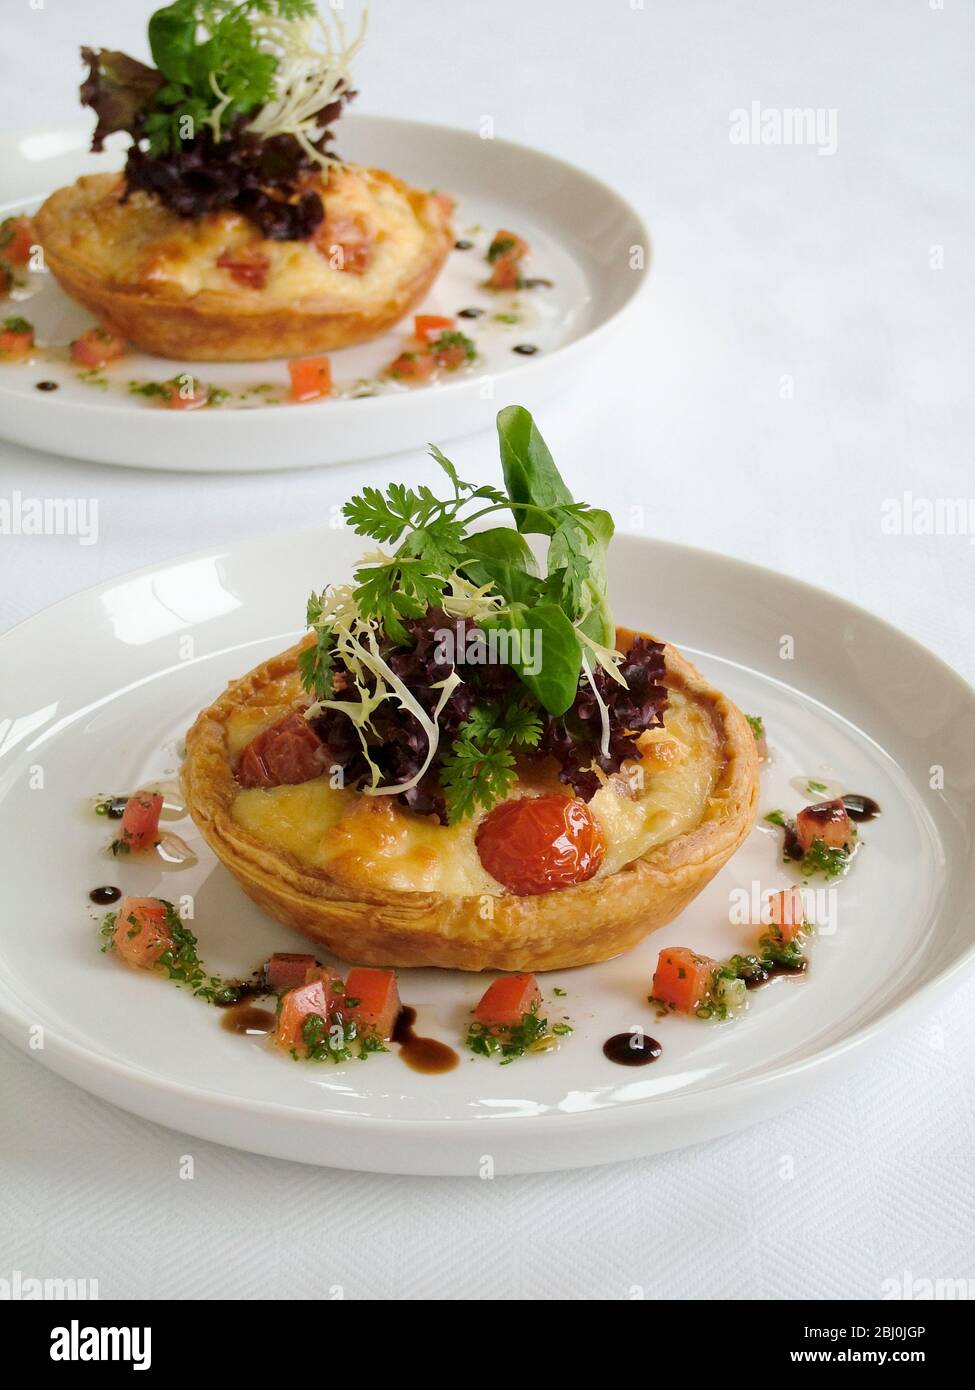 Little savoury party quiches with decorative garnish of baby leaf salad and surrounded by finely chopped tomatoes and herbs with oil and balsamic vine Stock Photo